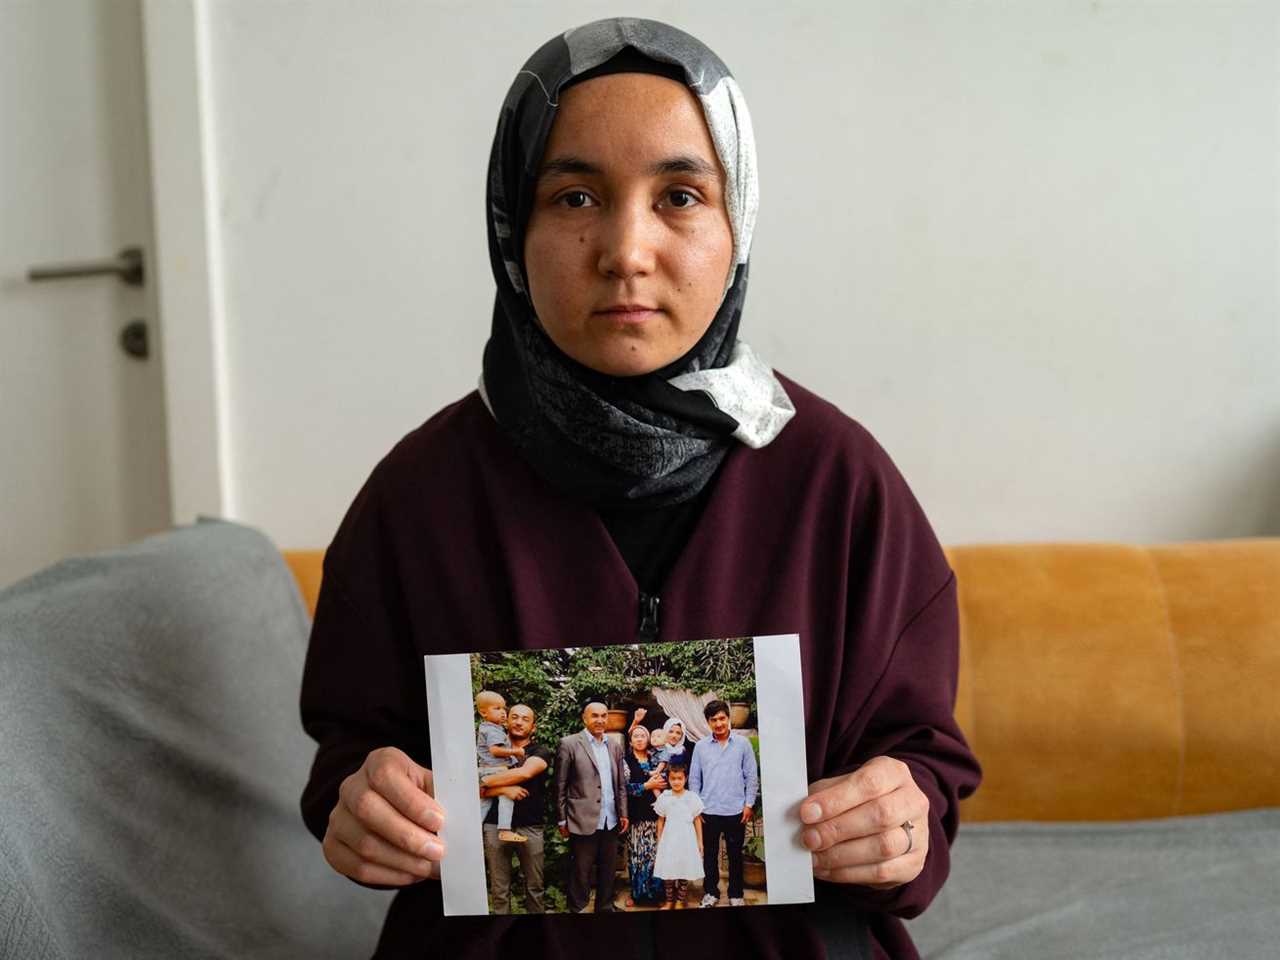 A woman wearing a headscarf sits on a couch and shows the camera a snapshot of her family.